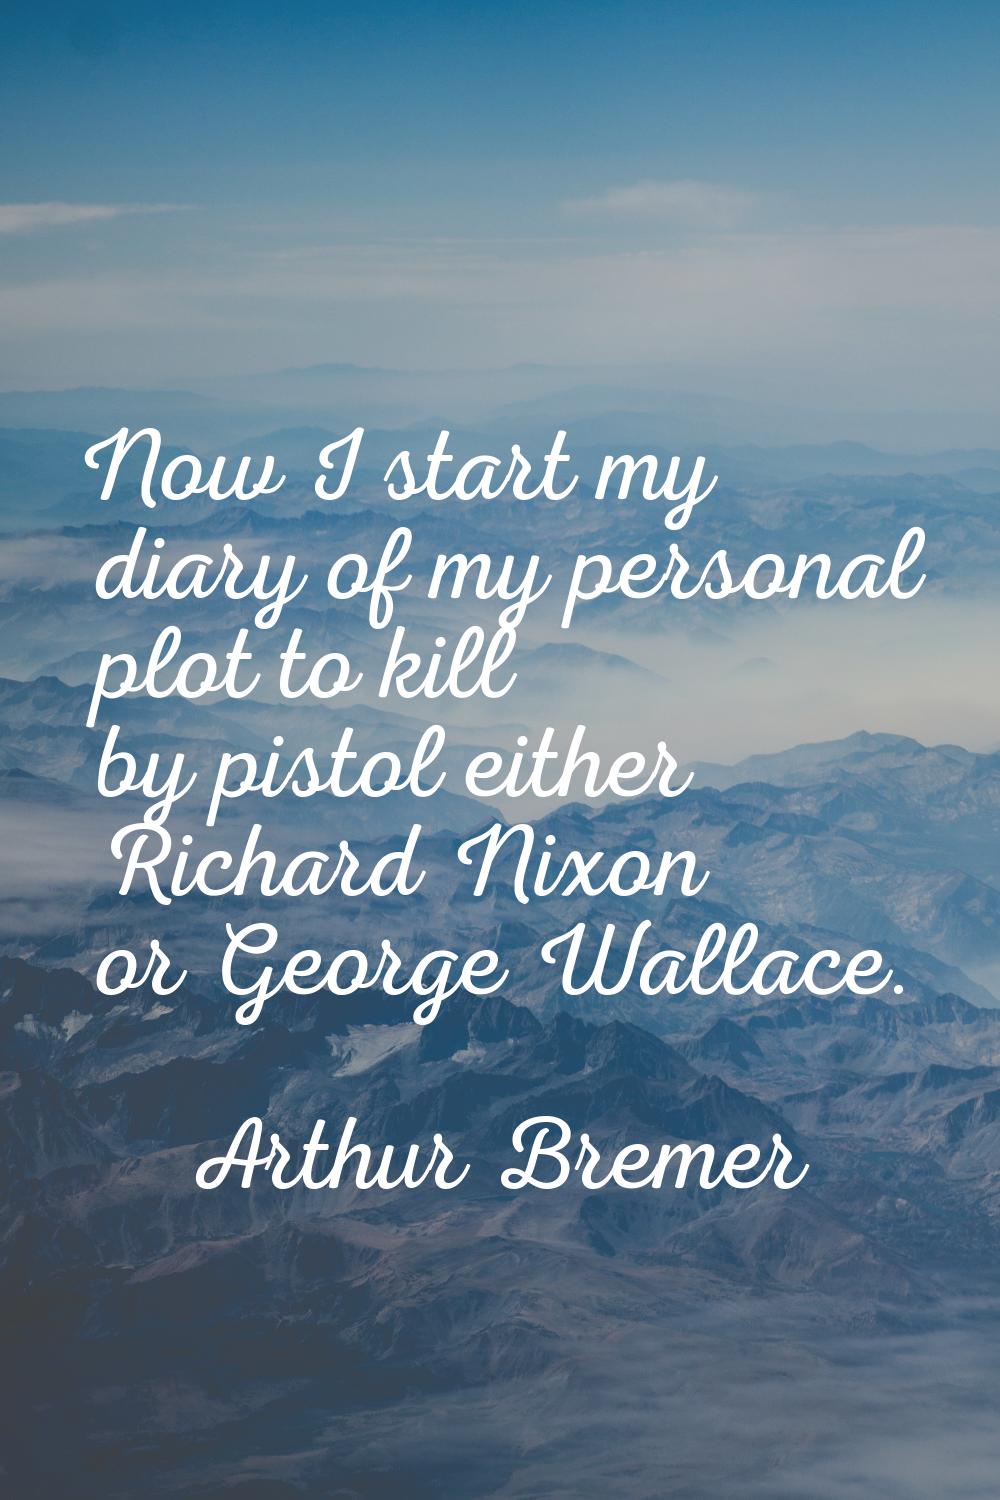 Now I start my diary of my personal plot to kill by pistol either Richard Nixon or George Wallace.